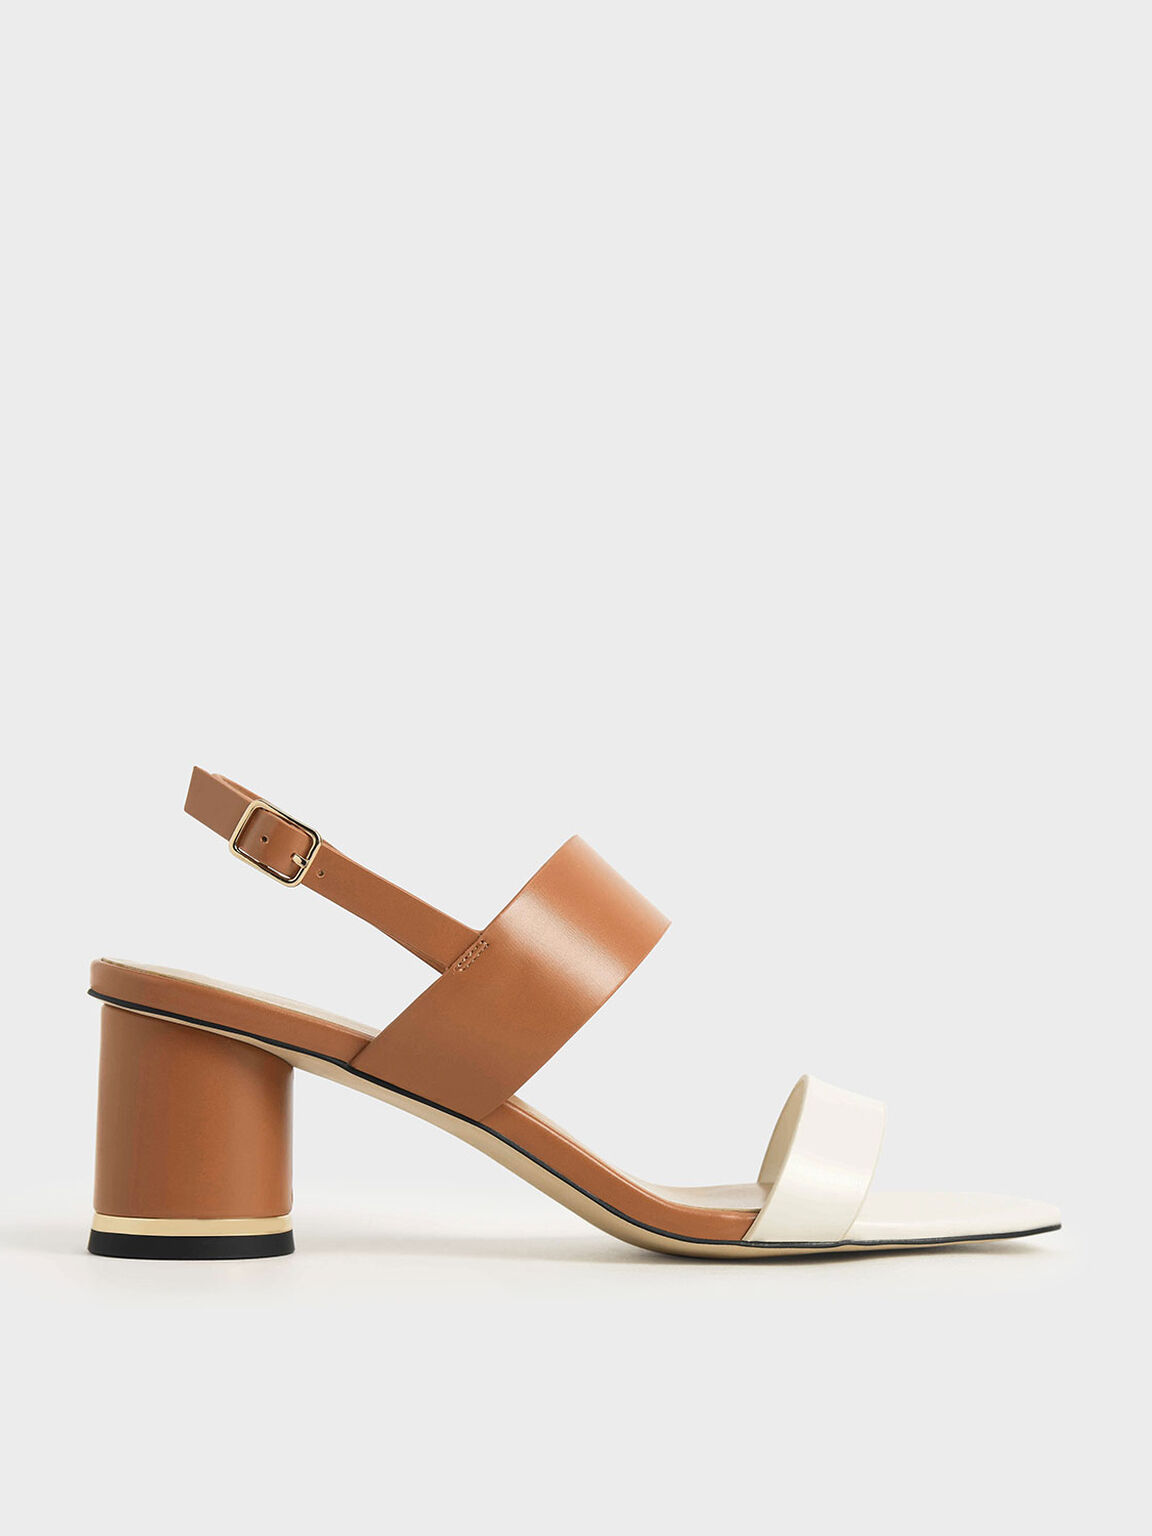 Two-Tone Cylindrical Heel Sandals, Multi, hi-res